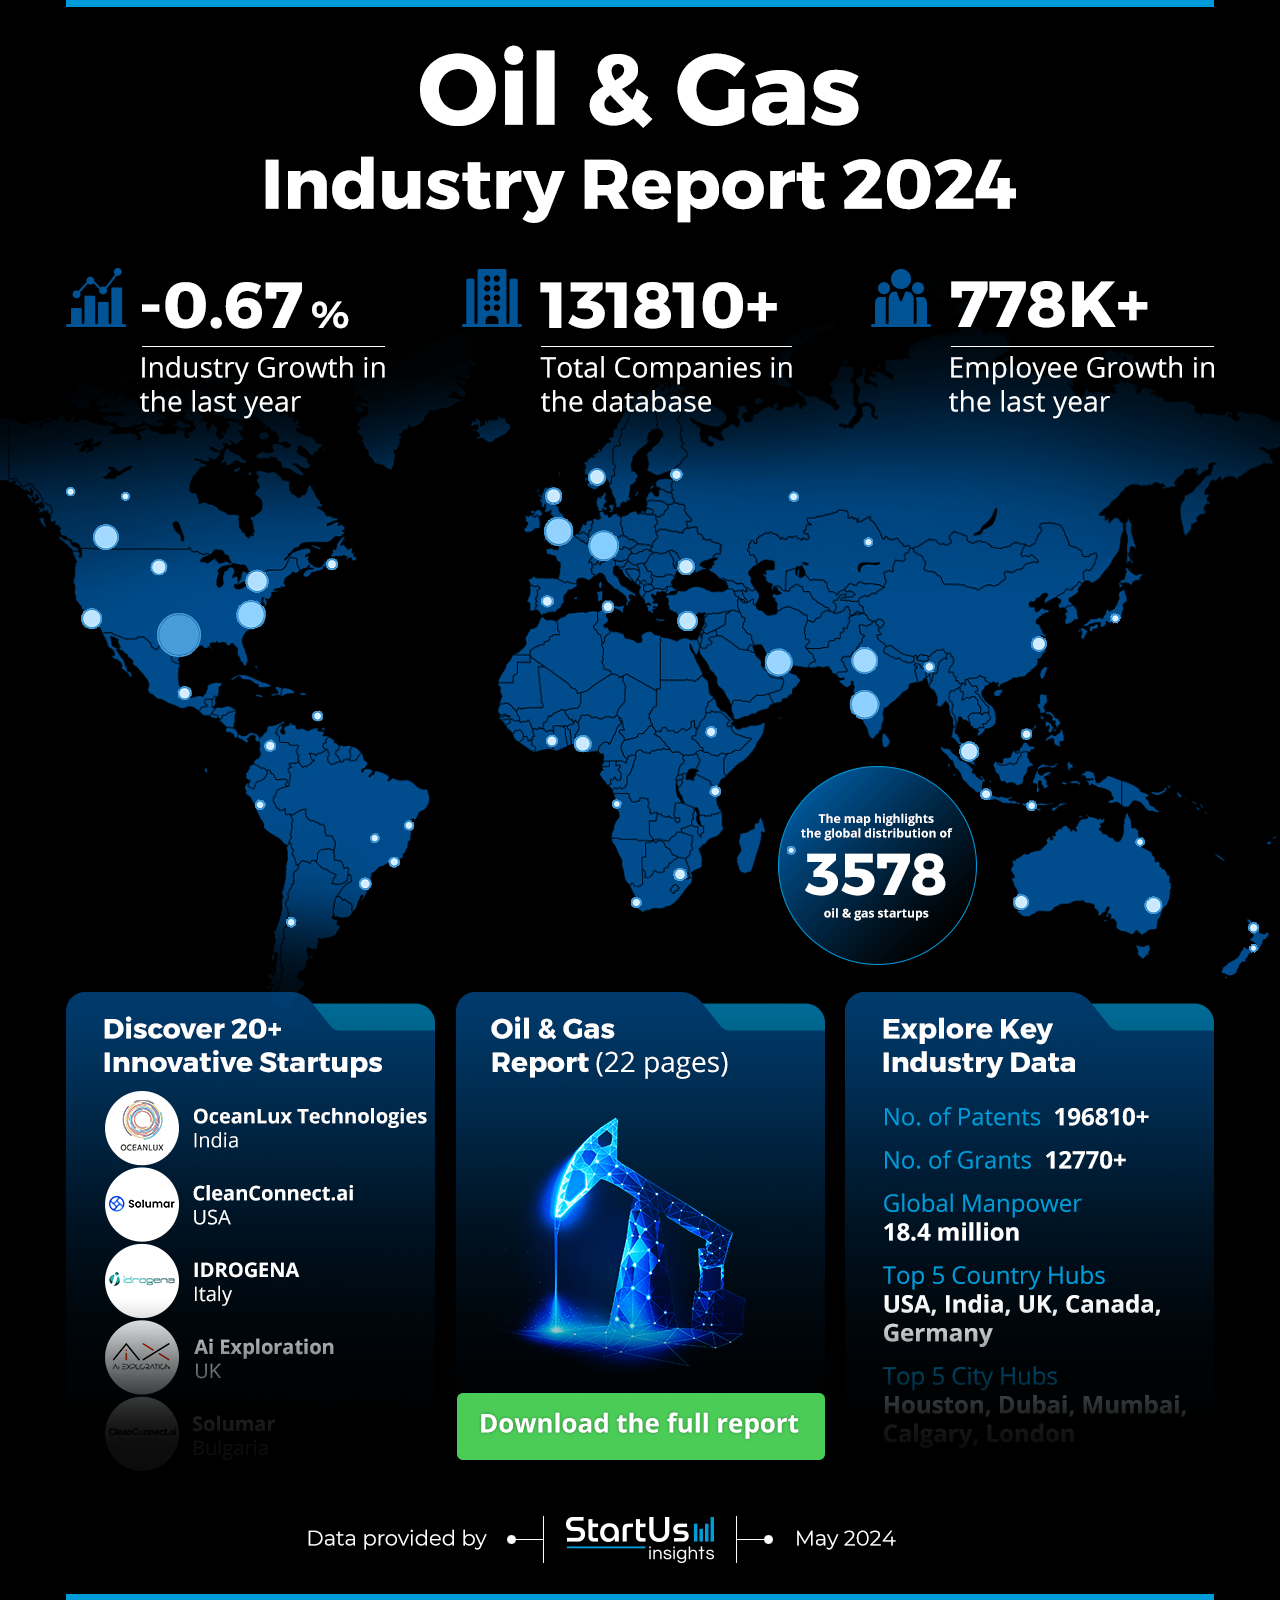 Oil&Gas-Industry-Report-HeatMap-StartUs-Insights-noresize